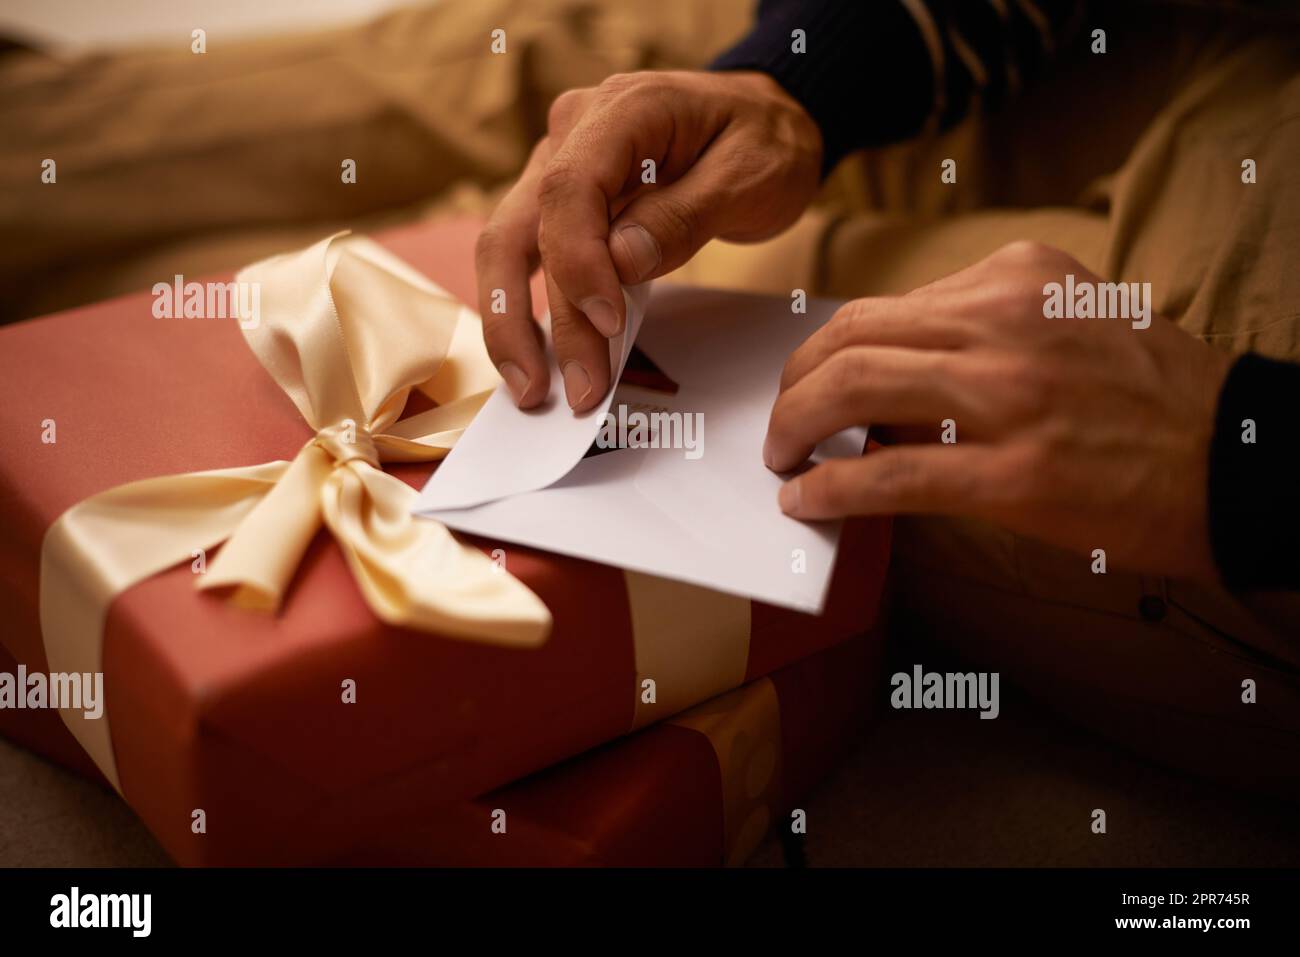 Spreading the joy. Shot of a handsome young man getting ready for Christmas. Stock Photo